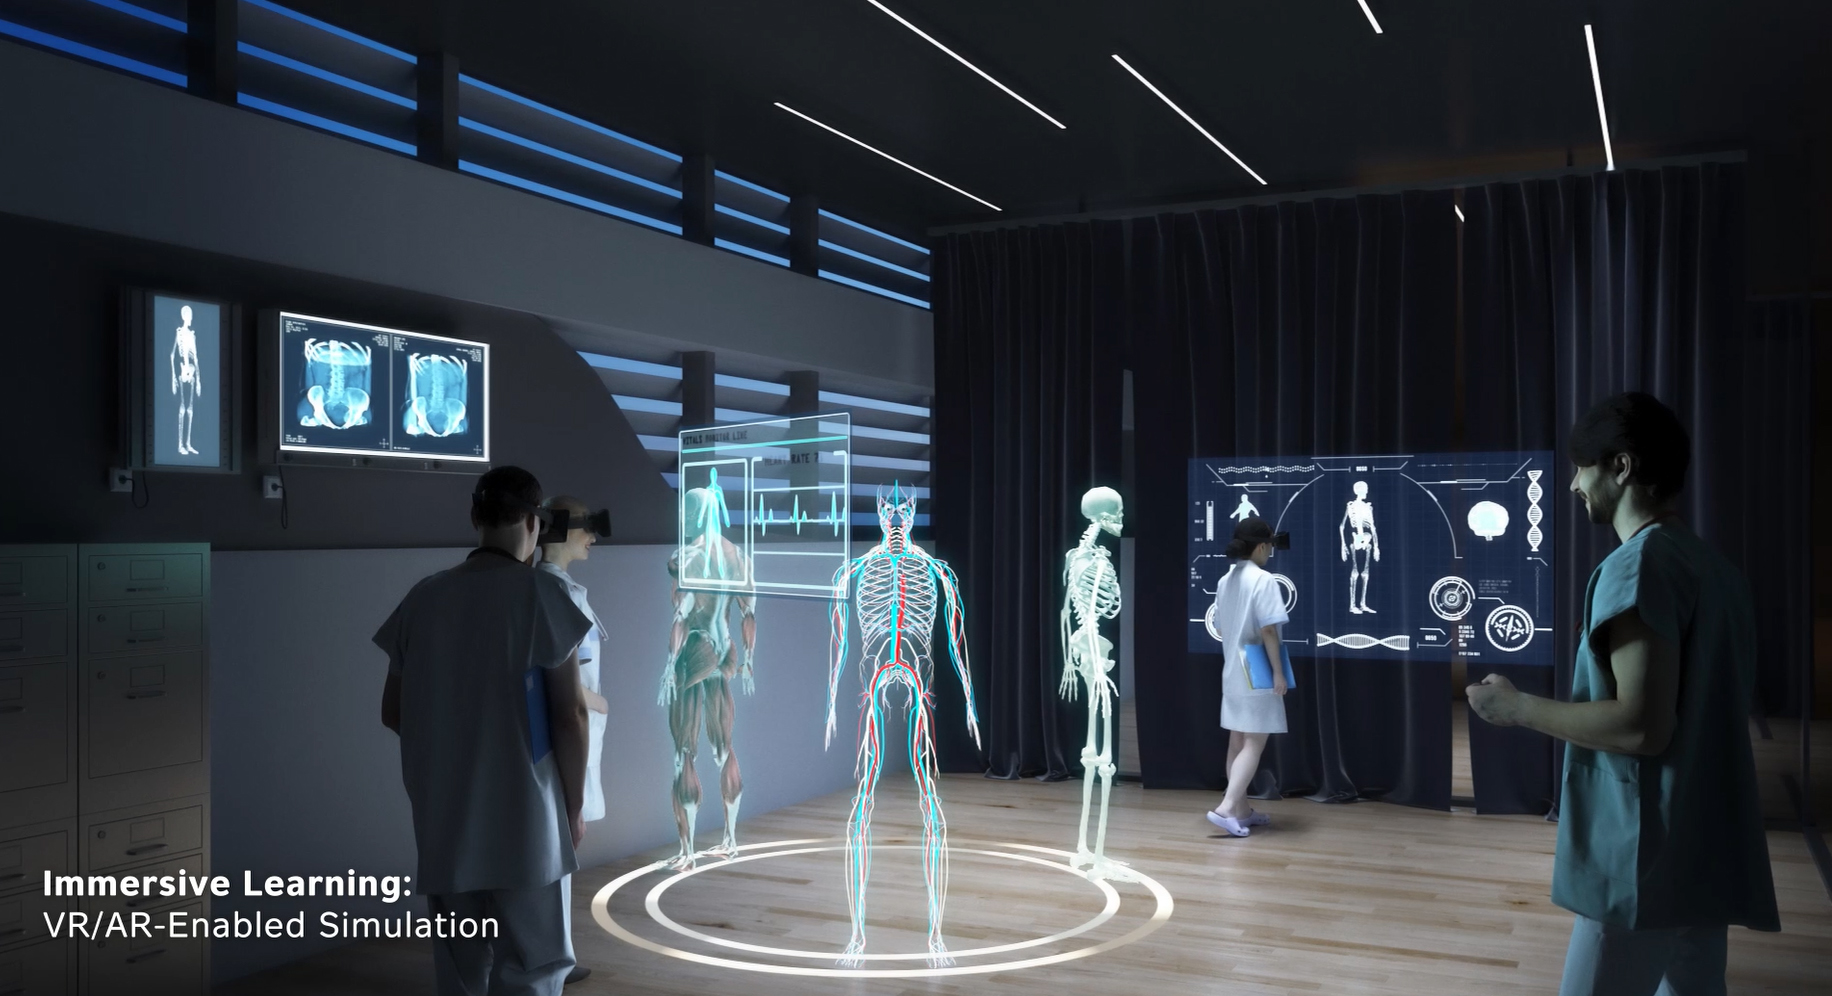 As part of a strategic combination between Atrium Health and Wake Forest Baptist Health, medical students in the future will learn in an advanced simulation center at the Wake Forest School of Medicine, employing the latest virtual reality and artificial intelligence technologies to advance medical science.